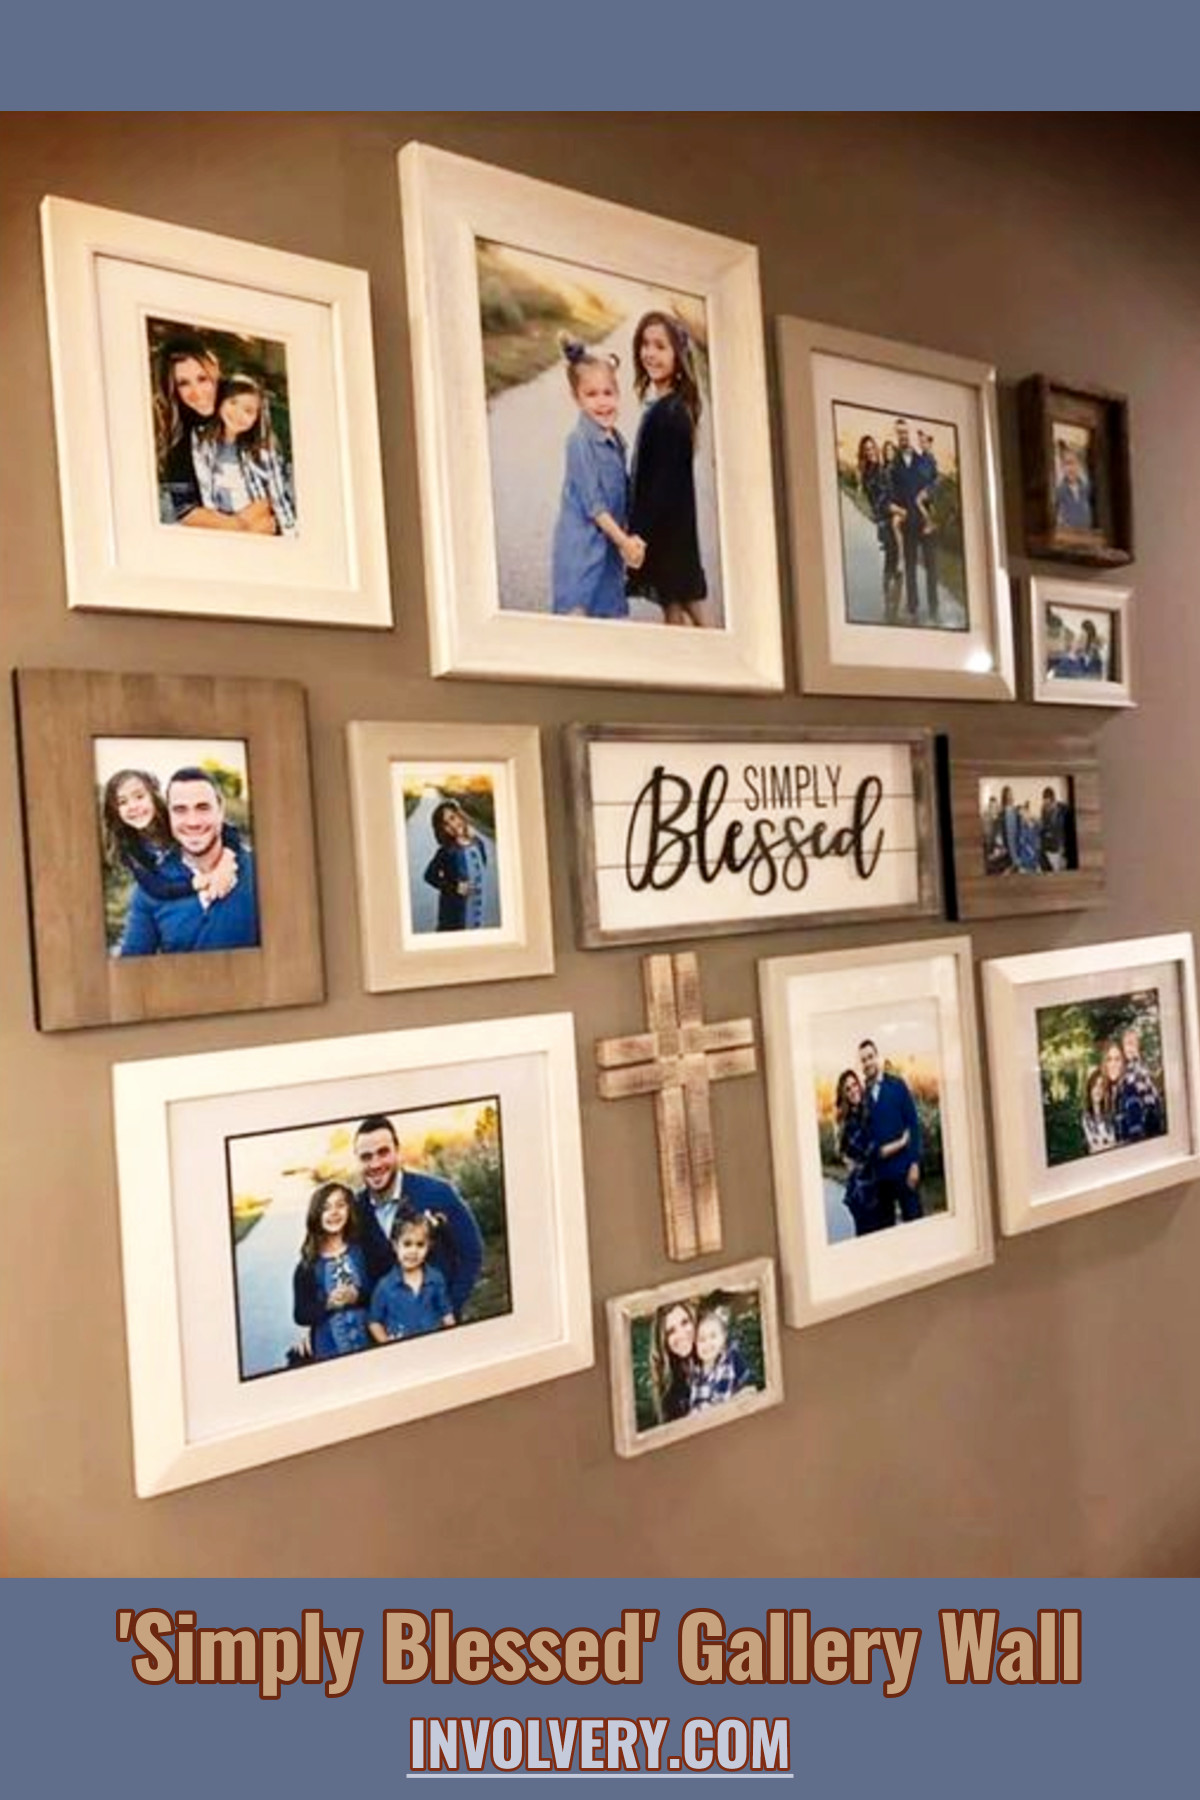 Simply Blessed Gallery Photo Wall Layout